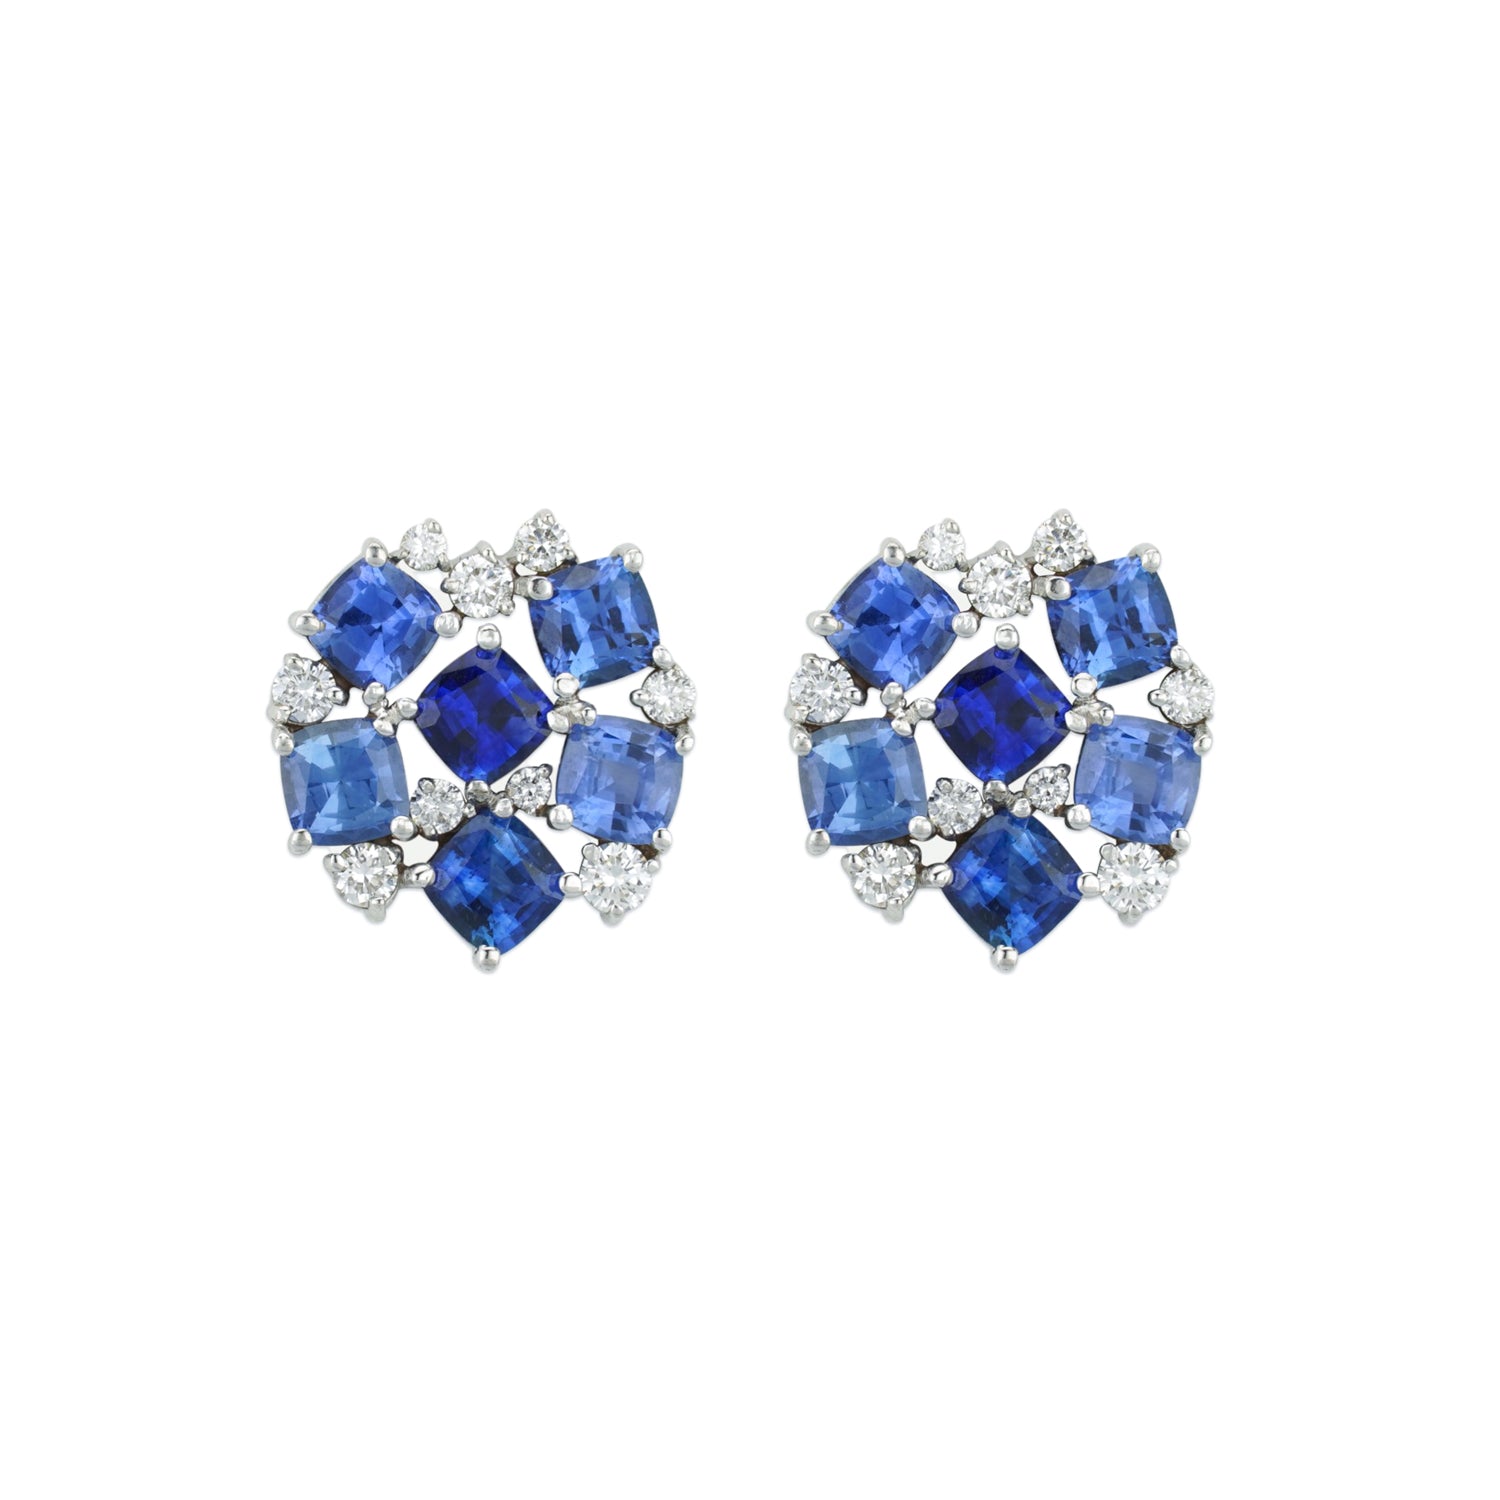 Penny Preville 18k Diamond and Cushion Sapphire Cluster Earrings